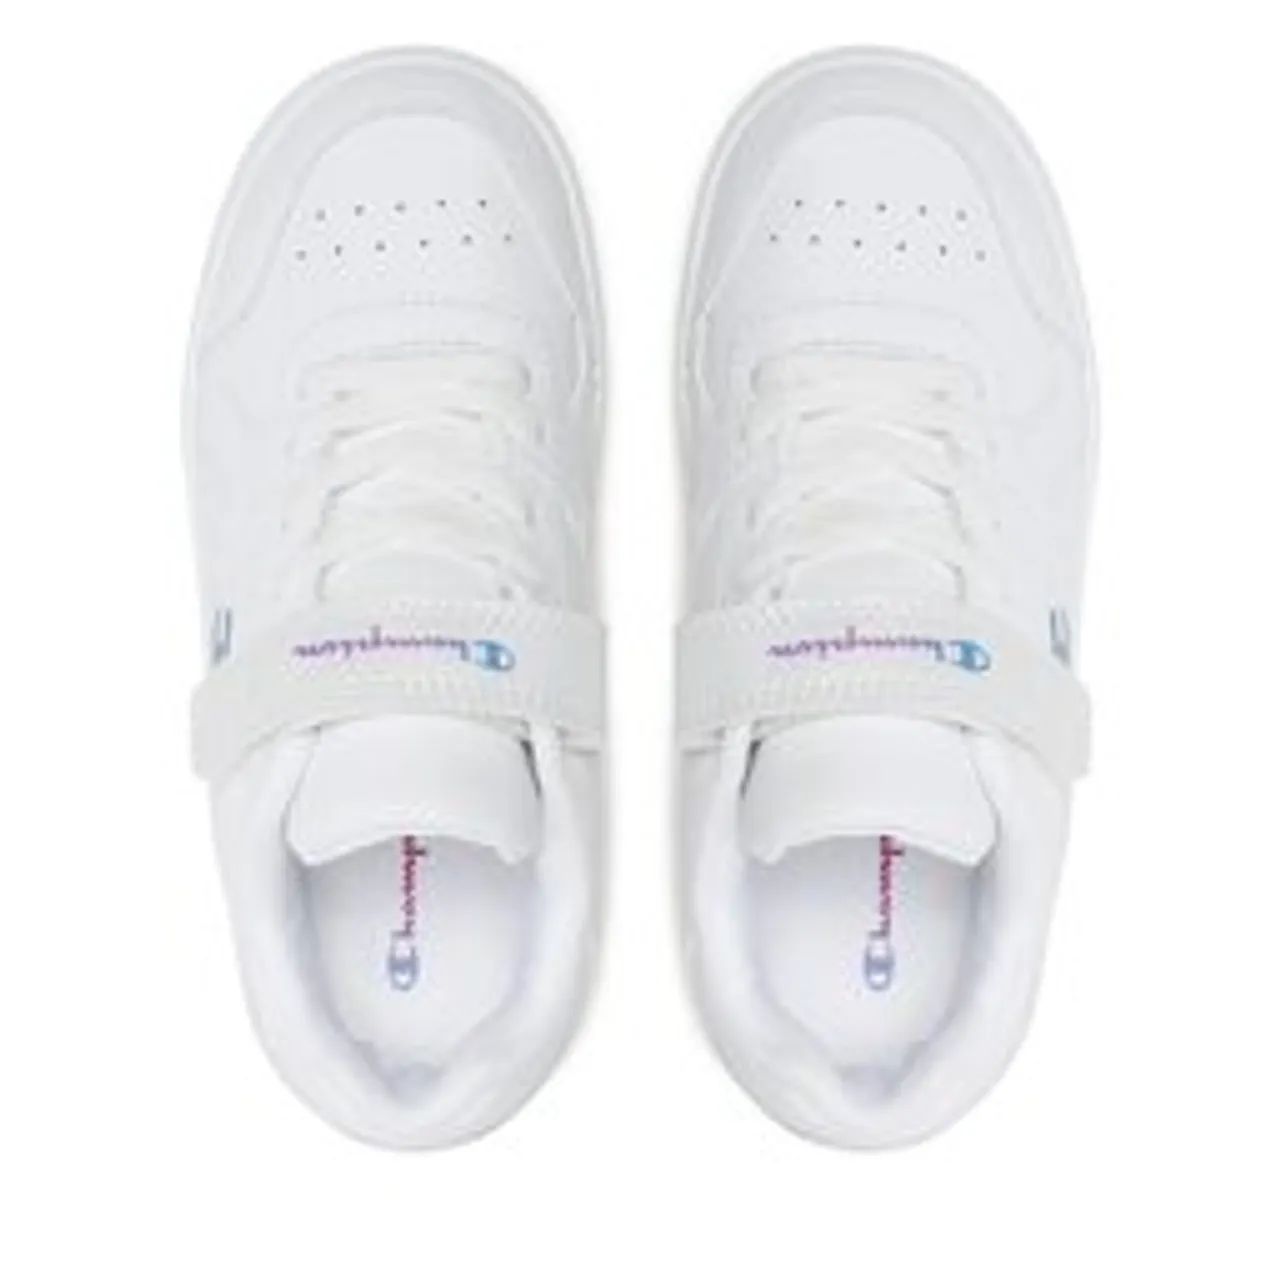 Sneakers Champion Rebound Low G Ps S32491-CHA-WW001 Wht